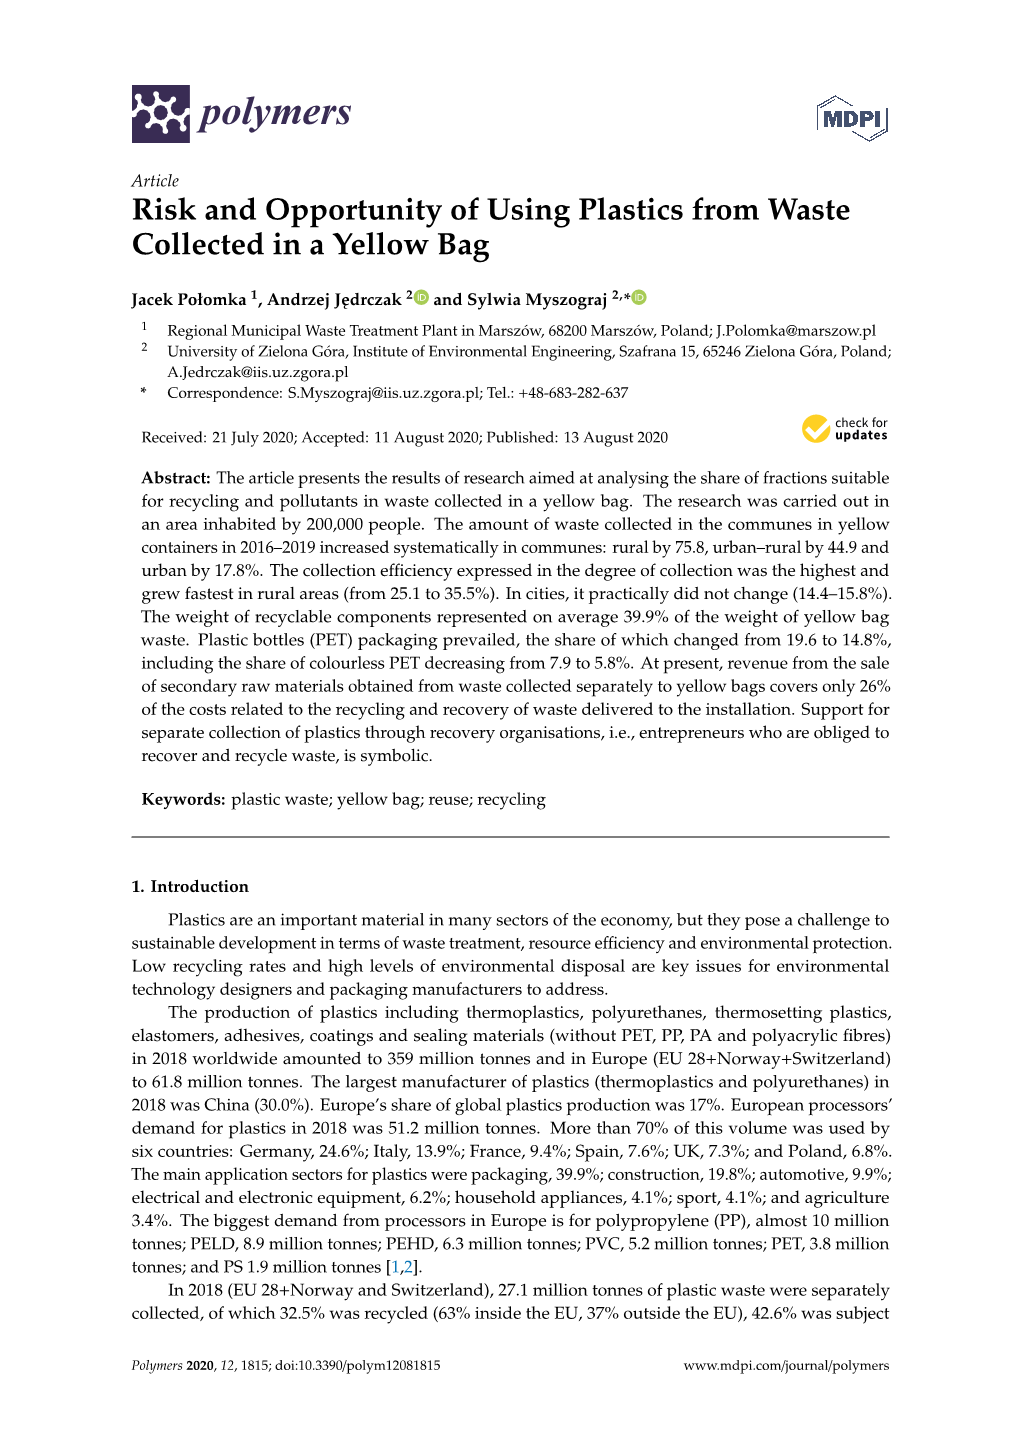 Risk and Opportunity of Using Plastics from Waste Collected in a Yellow Bag